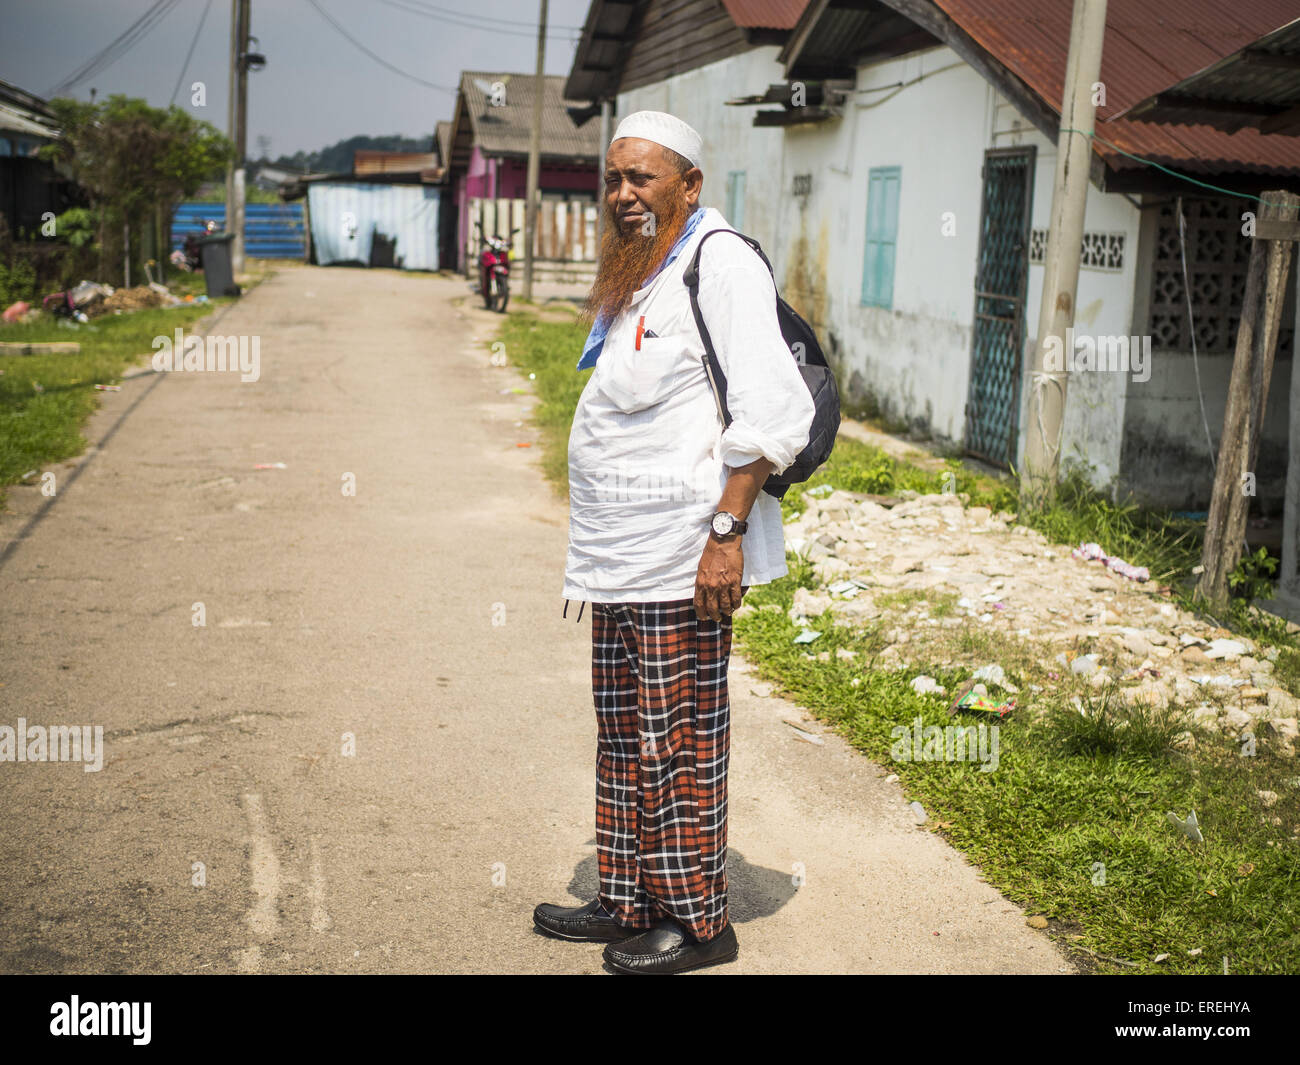 June 1, 2015 - Kulai, Johore, Malaysia - MOHAMED SHAFI bin HABE, a prominent member of the Rohingya community in Kulai, Malaysia, walks through a neighborhood that houses more than 100 Rohingya refugees in Kulai. The UN says the Rohingya, a Muslim minority in western Myanmar, are the most persecuted ethnic minority in the world. The government of Myanmar insists the Rohingya are illegal immigrants from Bangladesh and has refused to grant them citizenship. Most of the Rohingya in Myanmar have been confined to Internal Displaced Persons camp in Rakhine state, bordering Bangladesh. © ZUMA Press,  Stock Photo